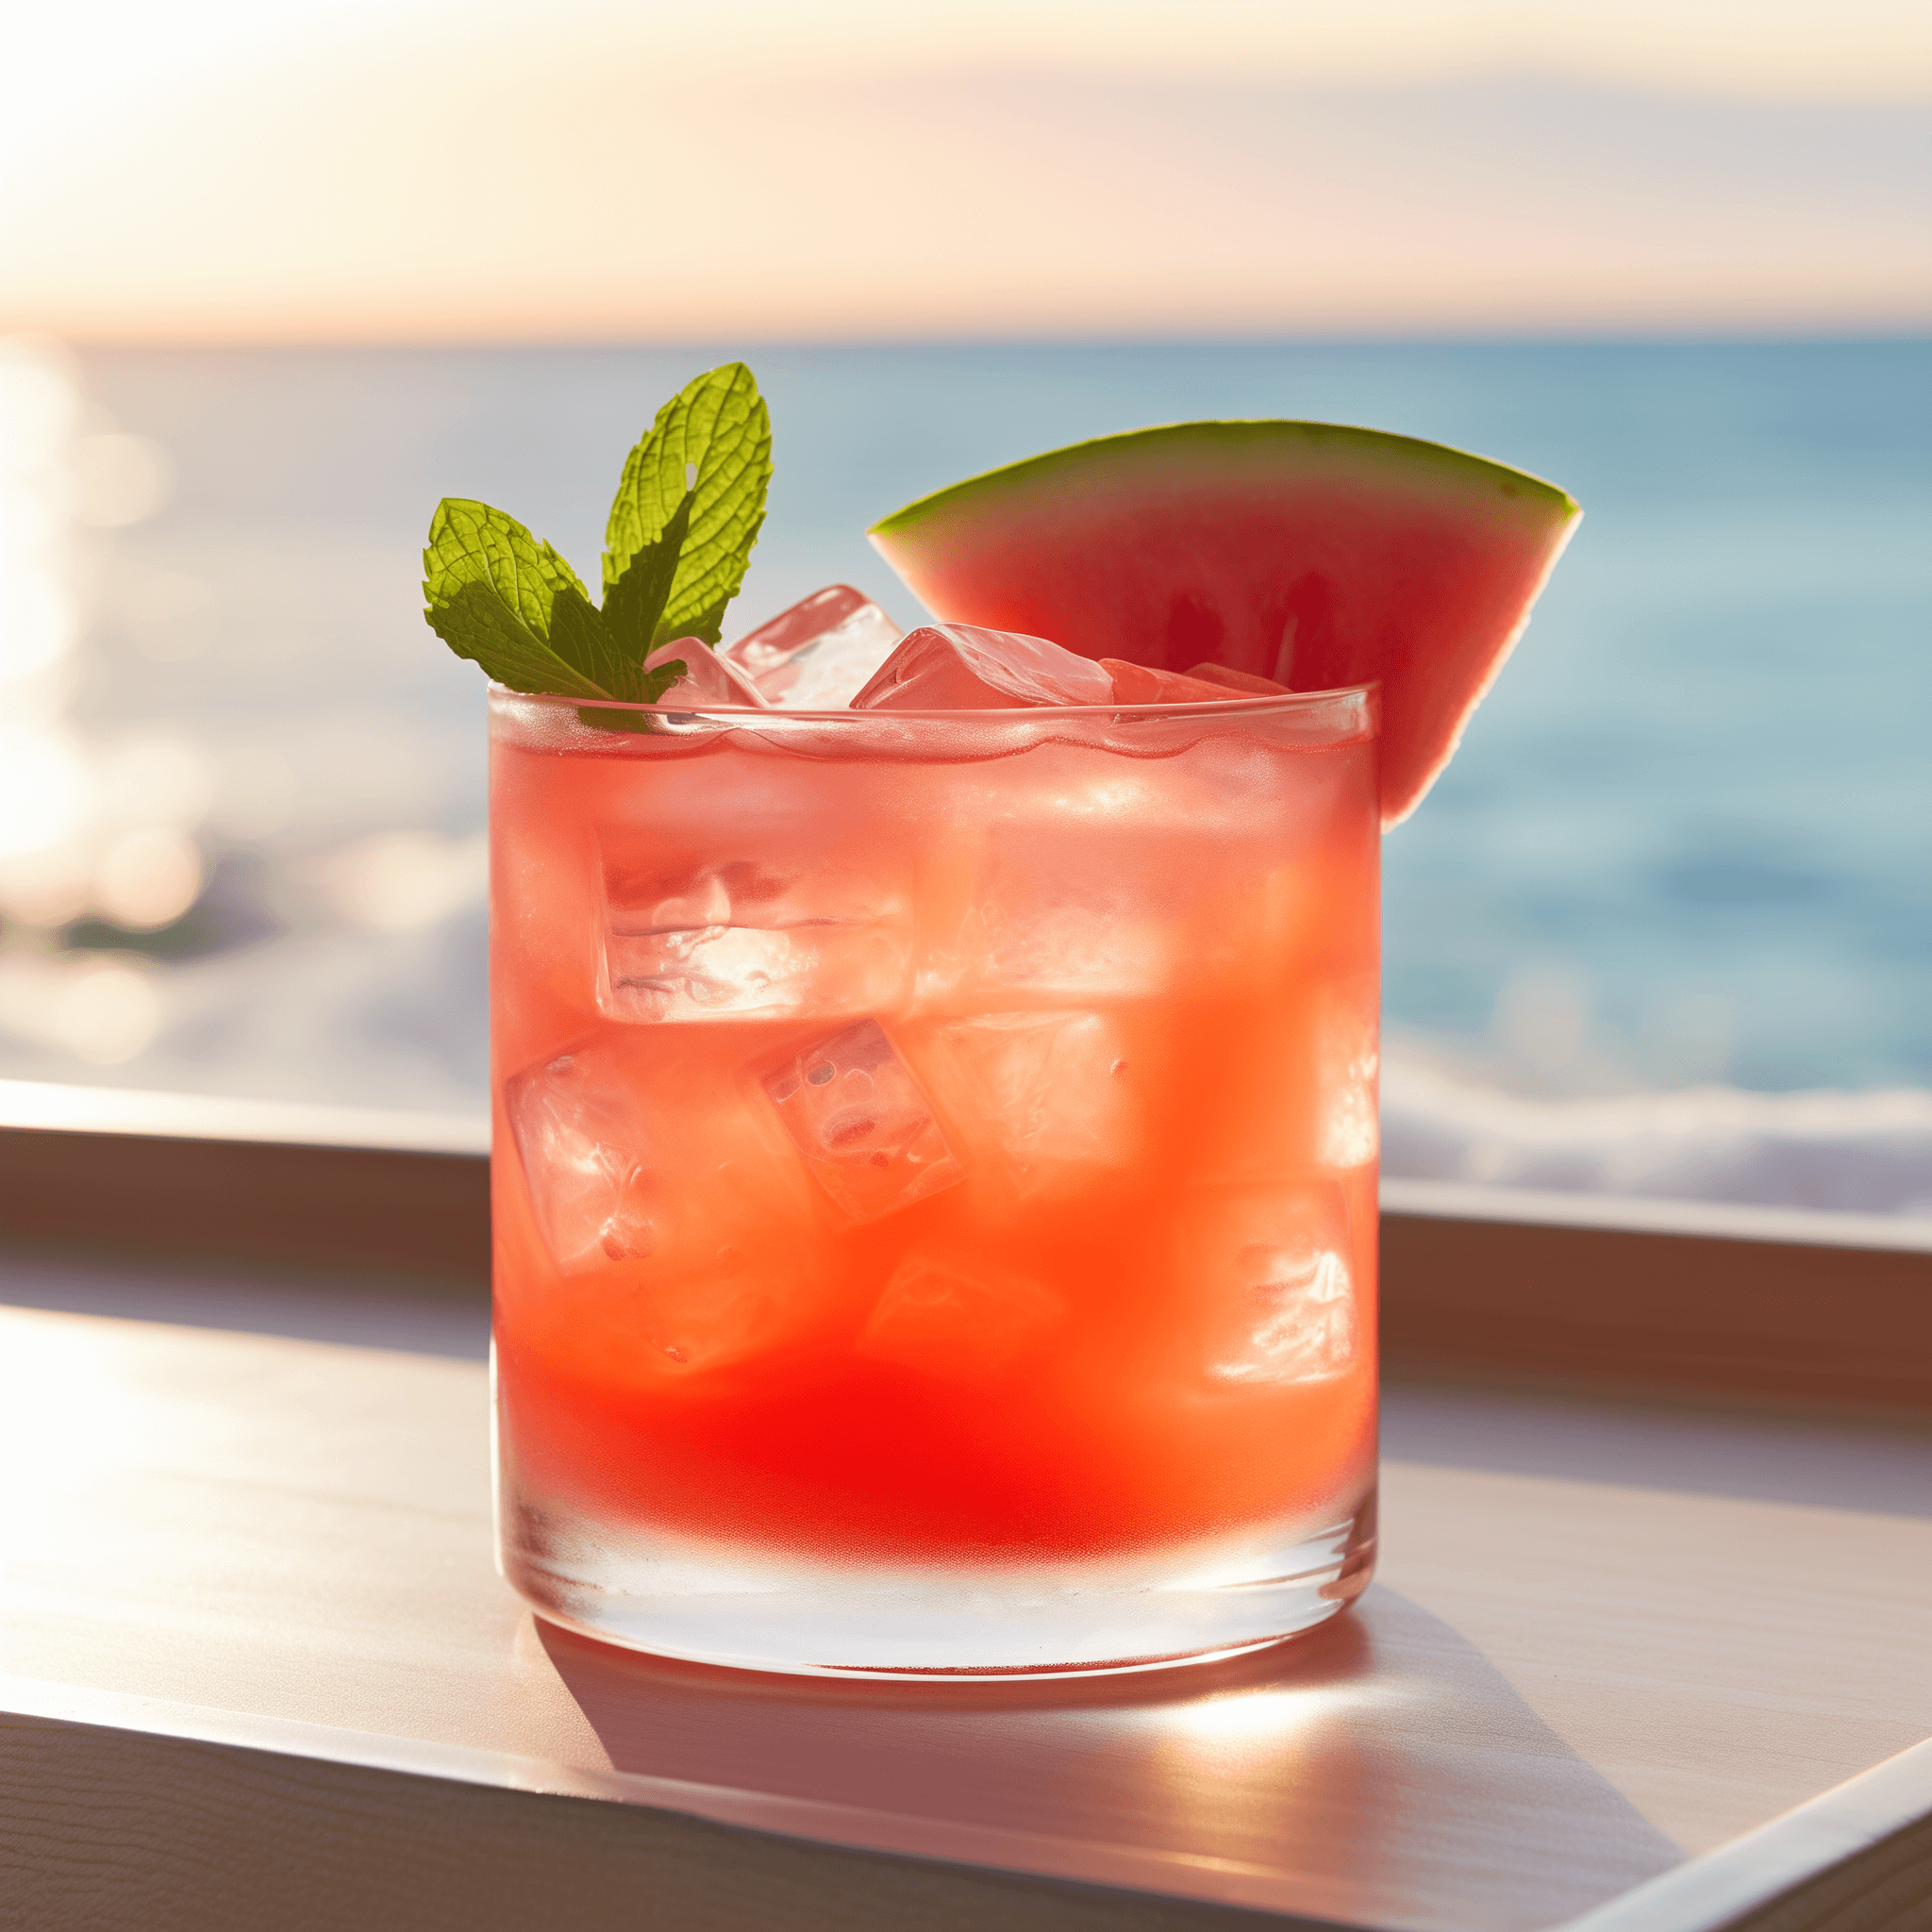 Watermelon Sour Cocktail Recipe - The Watermelon Sour is a harmonious blend of sweet and tart flavors. The juicy freshness of watermelon balances the zesty sourness of the lemon, while the simple syrup adds a smooth sweetness. The addition of bourbon gives it a robust and slightly oaky undertone, making it a well-rounded and invigorating drink.